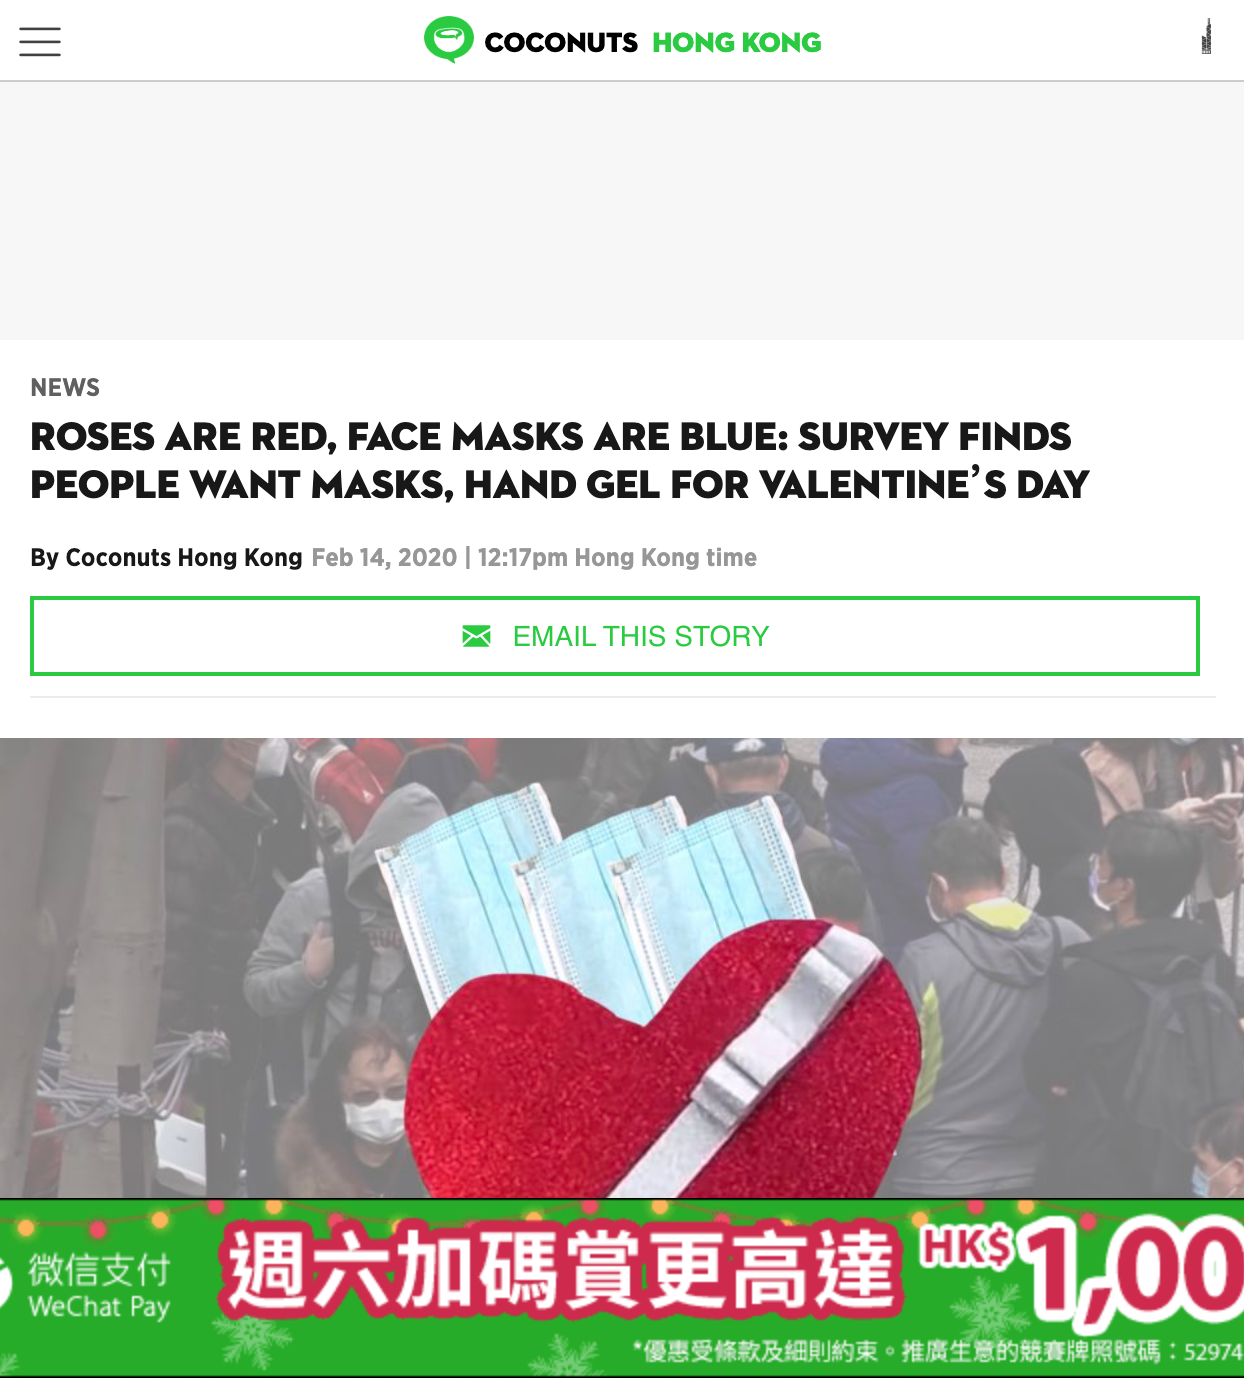 Speed Dating 傳媒報導: Roses are red, face masks are blue: Survey finds people want masks, hand gel for Valentine’s Day